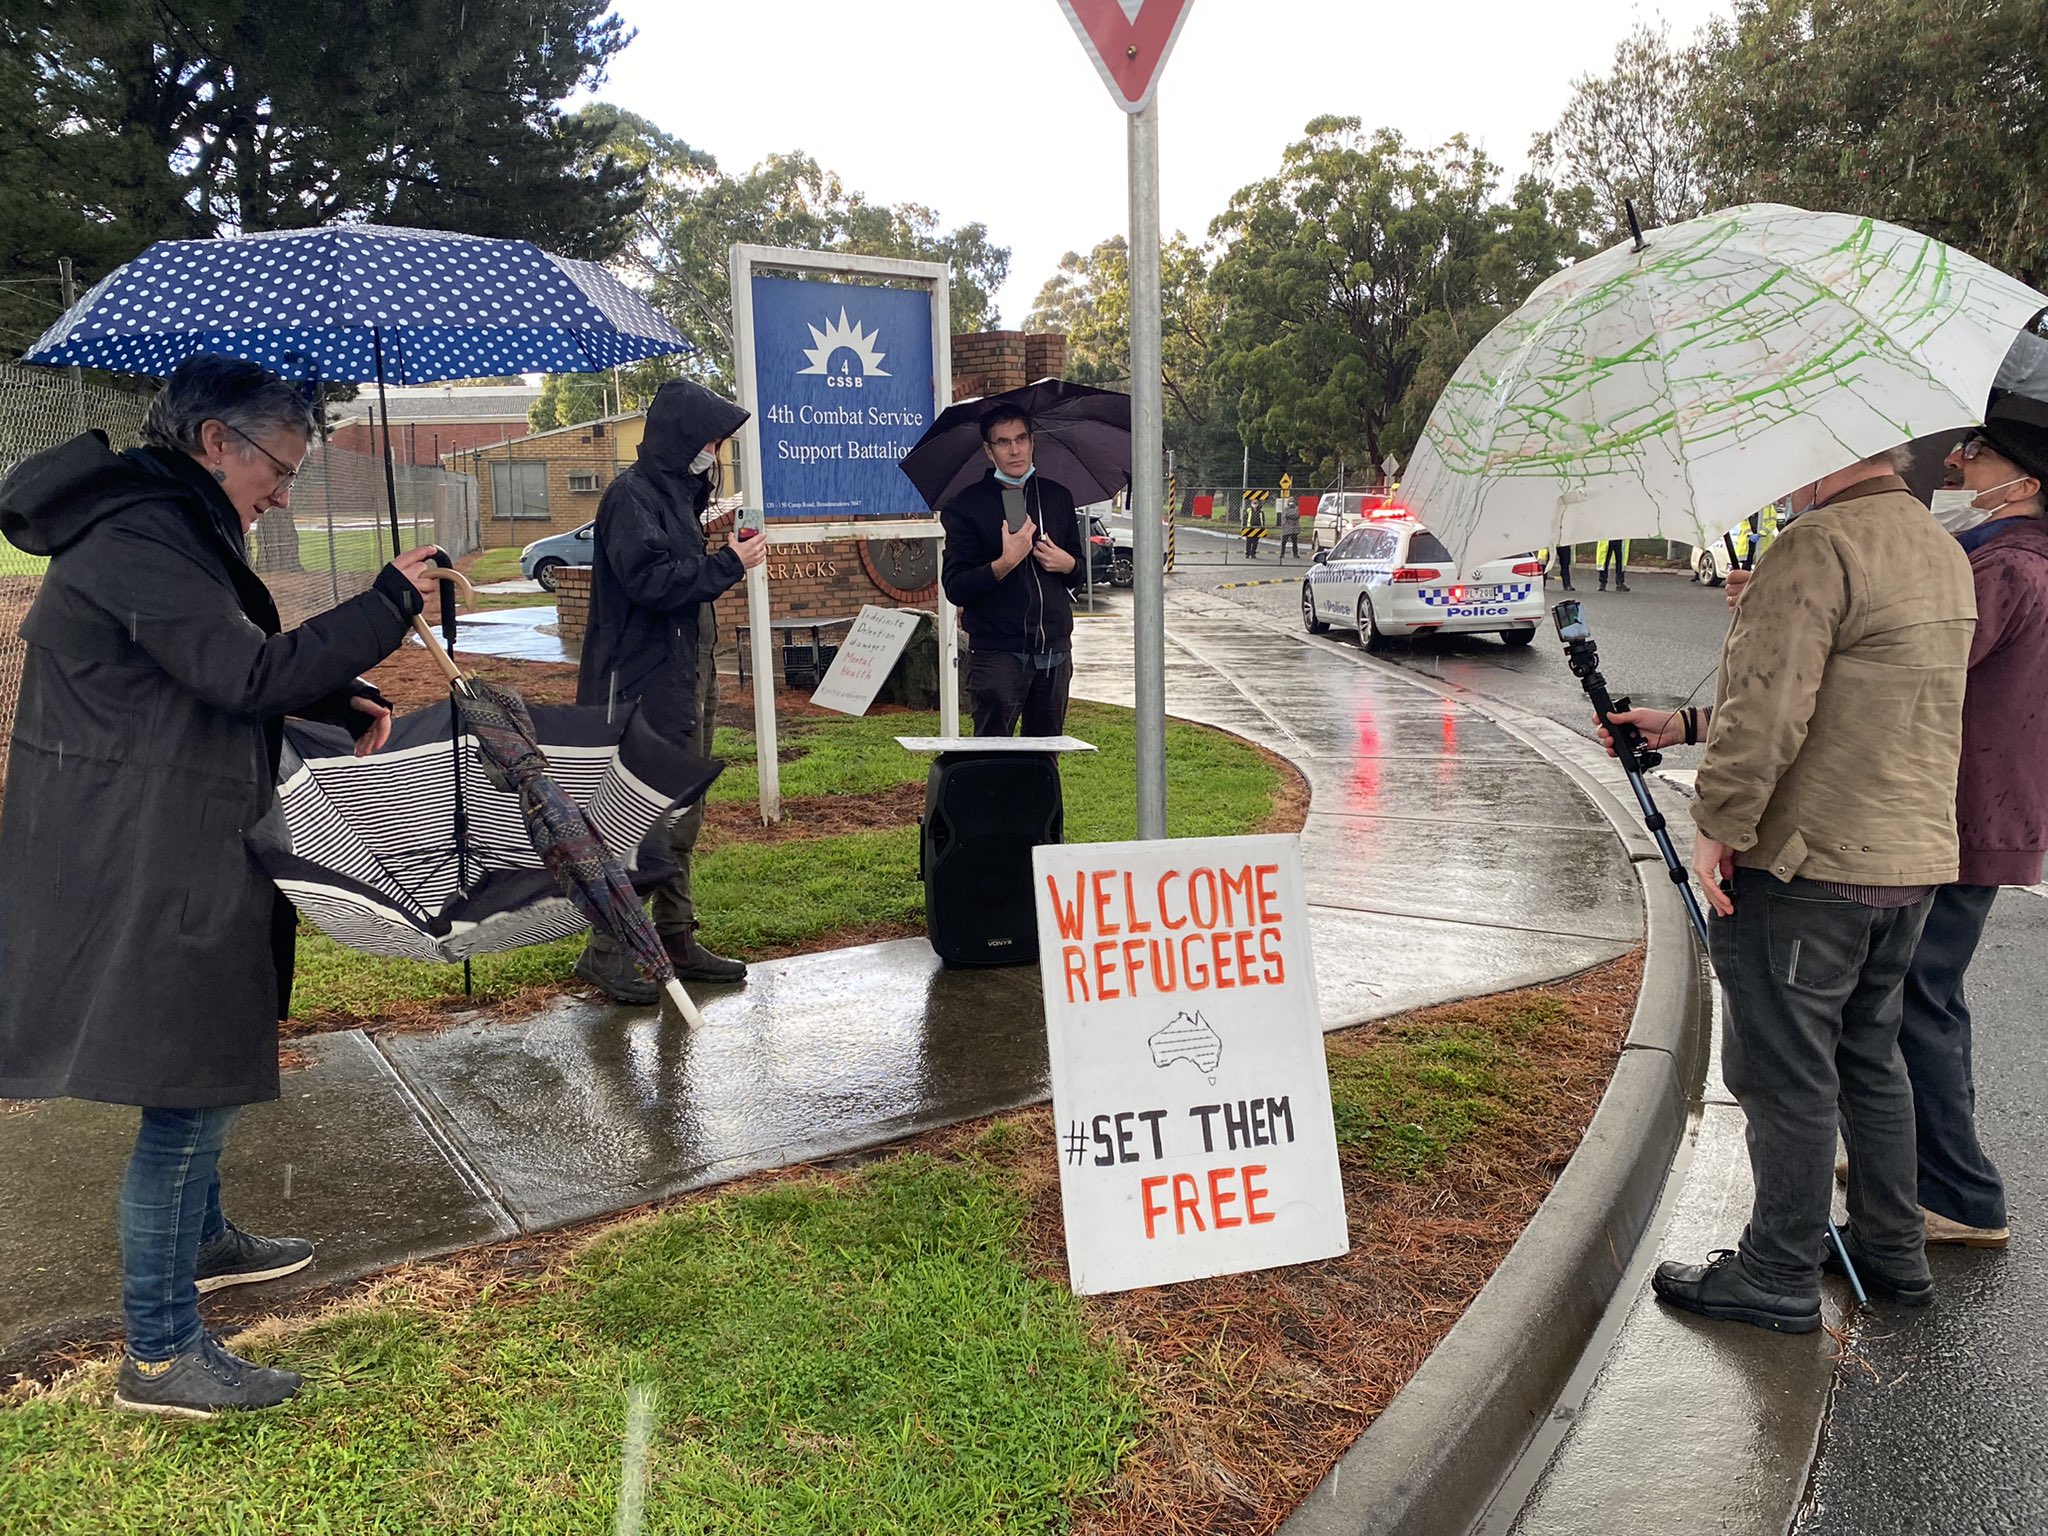 Refugee Action Collective rallying in support of hunger strikers outside the Broadmeadow MITA facility on 25 June. Chris Breen is at the centre underneath a black umbrella. Image supplied by Refuge